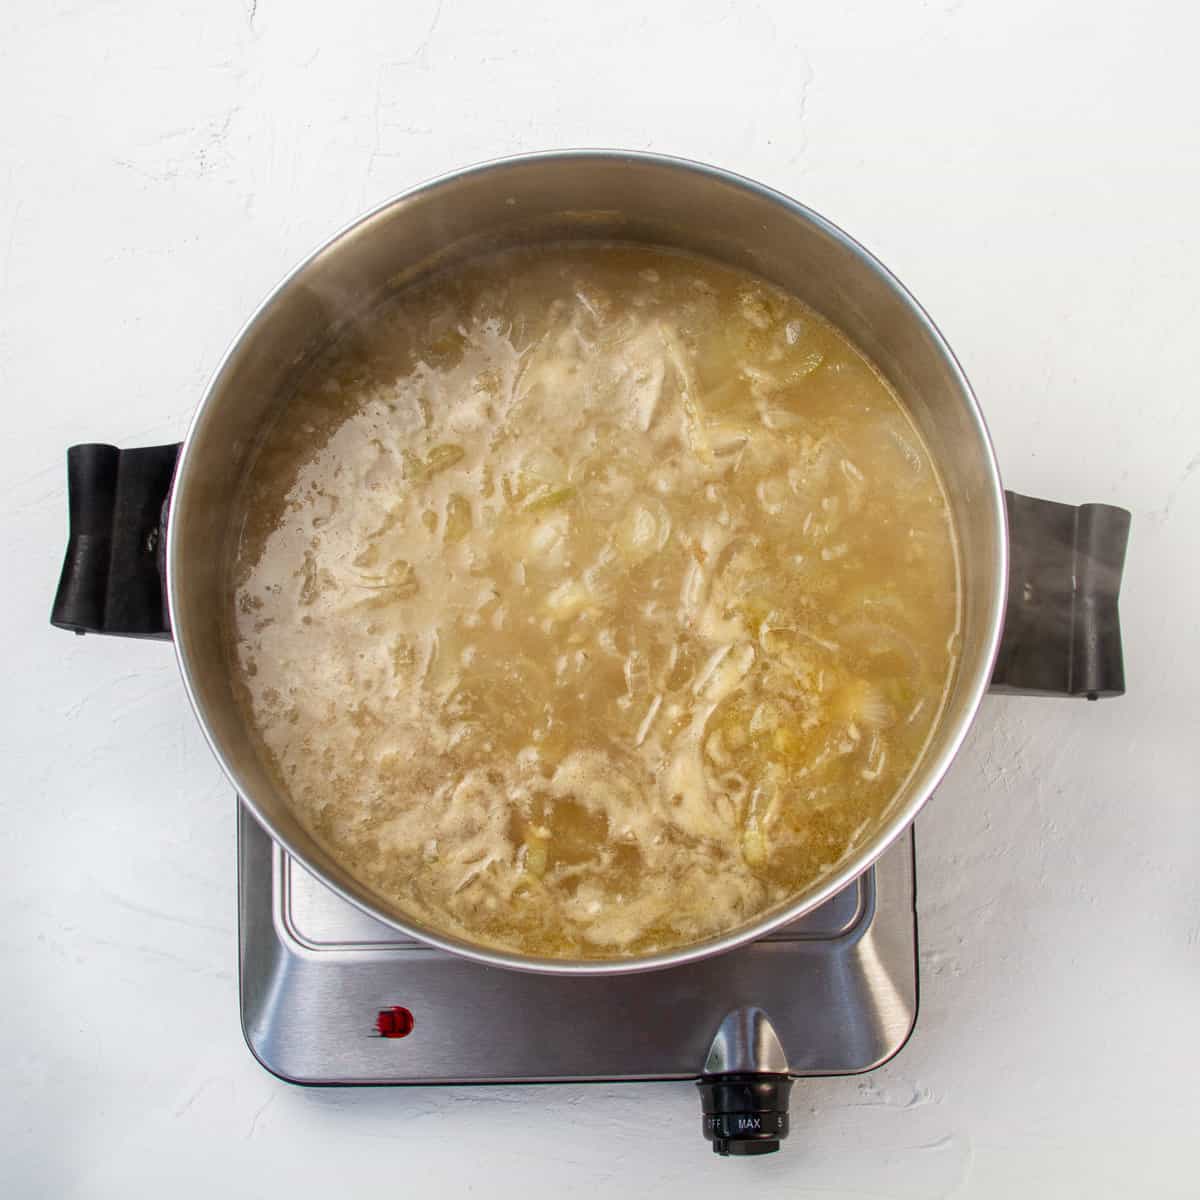 Caramelized onions in broth, cooking in a hot pan.